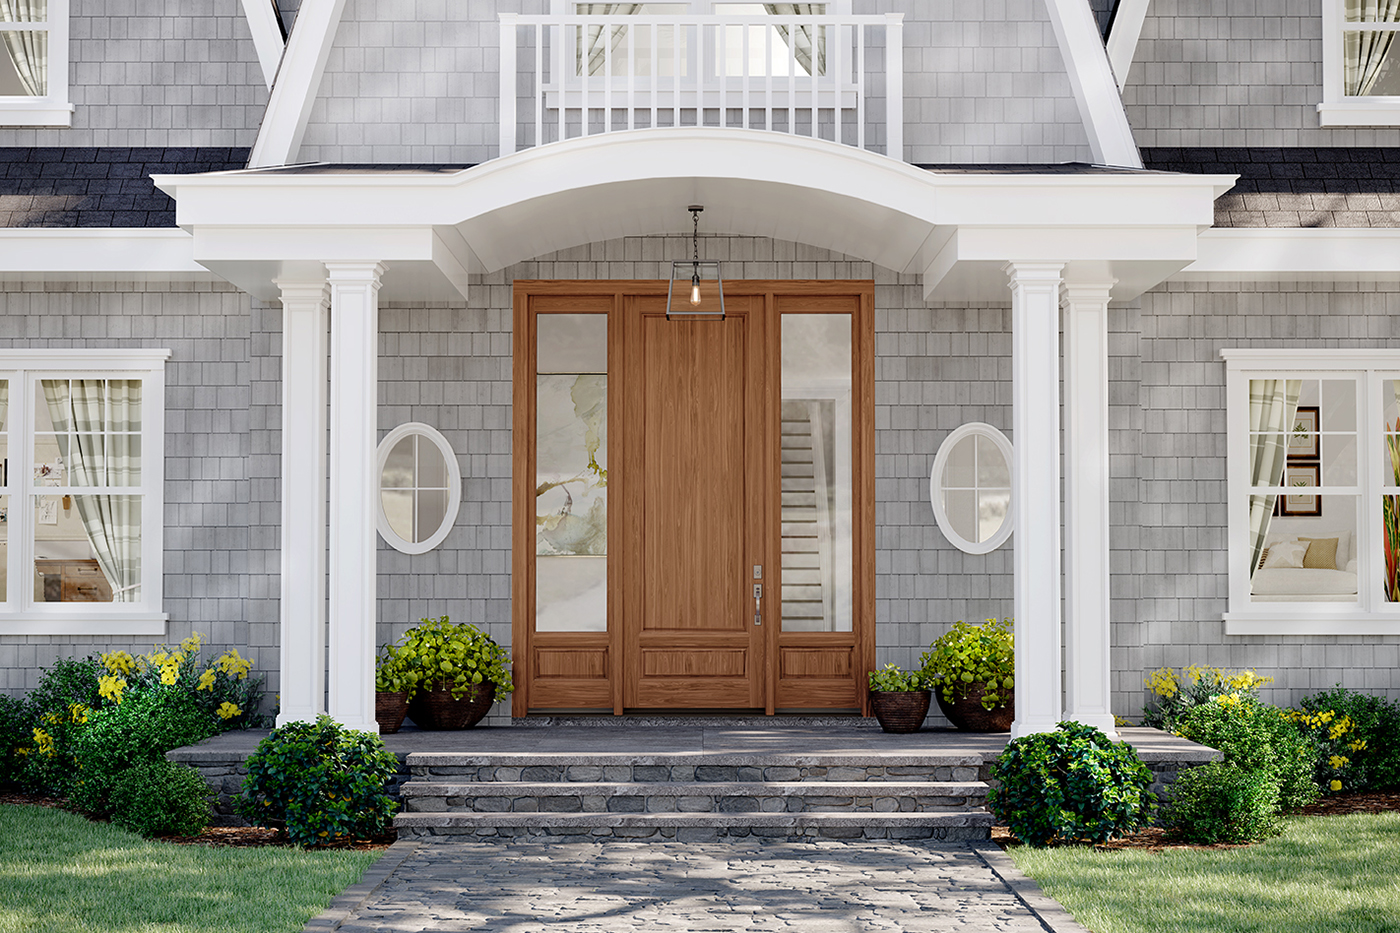 Sidelight Windows: An Upgrade to Your Front Door